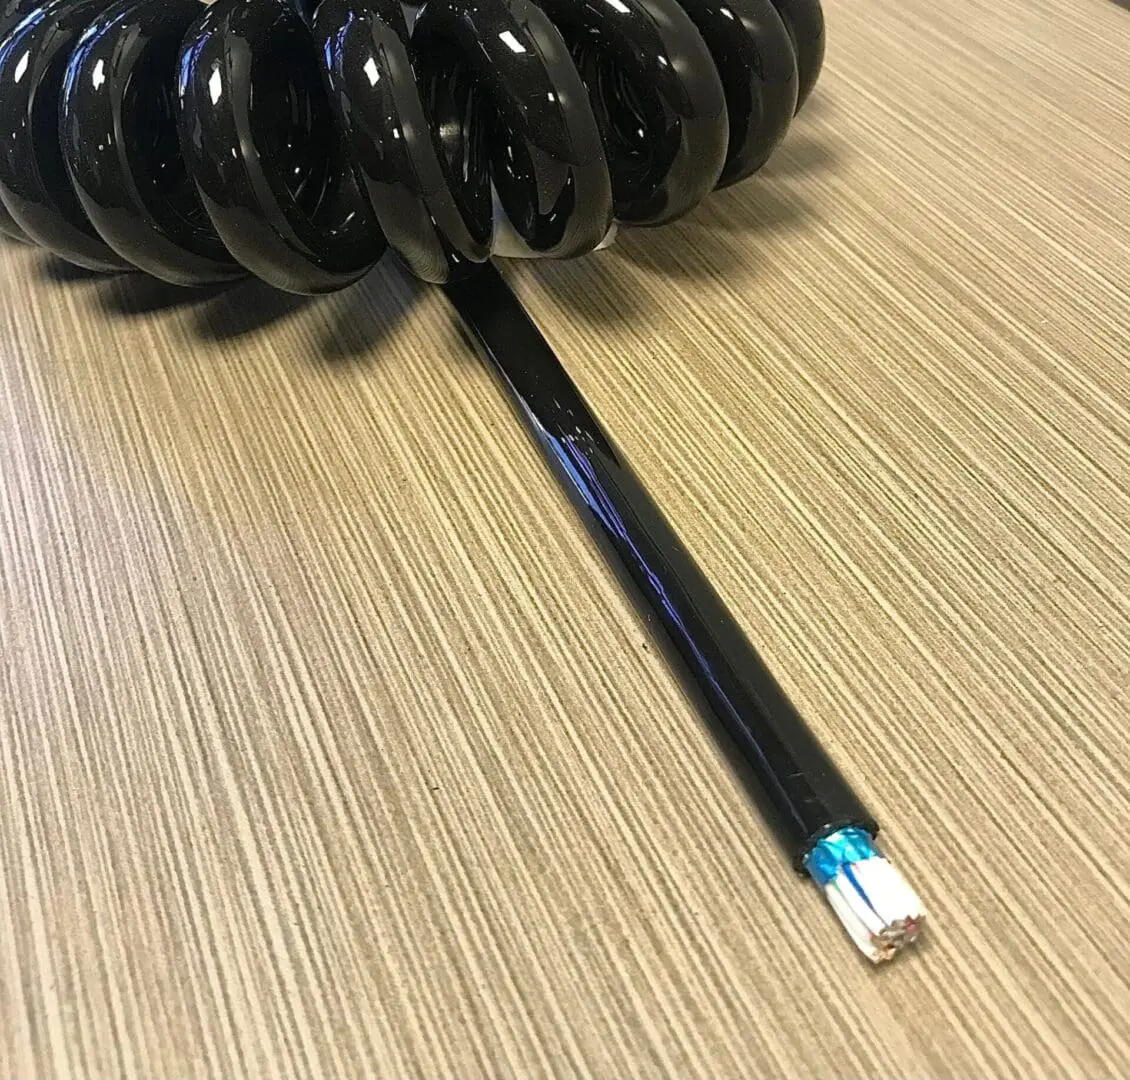 A black spiral antenna on top of a table.